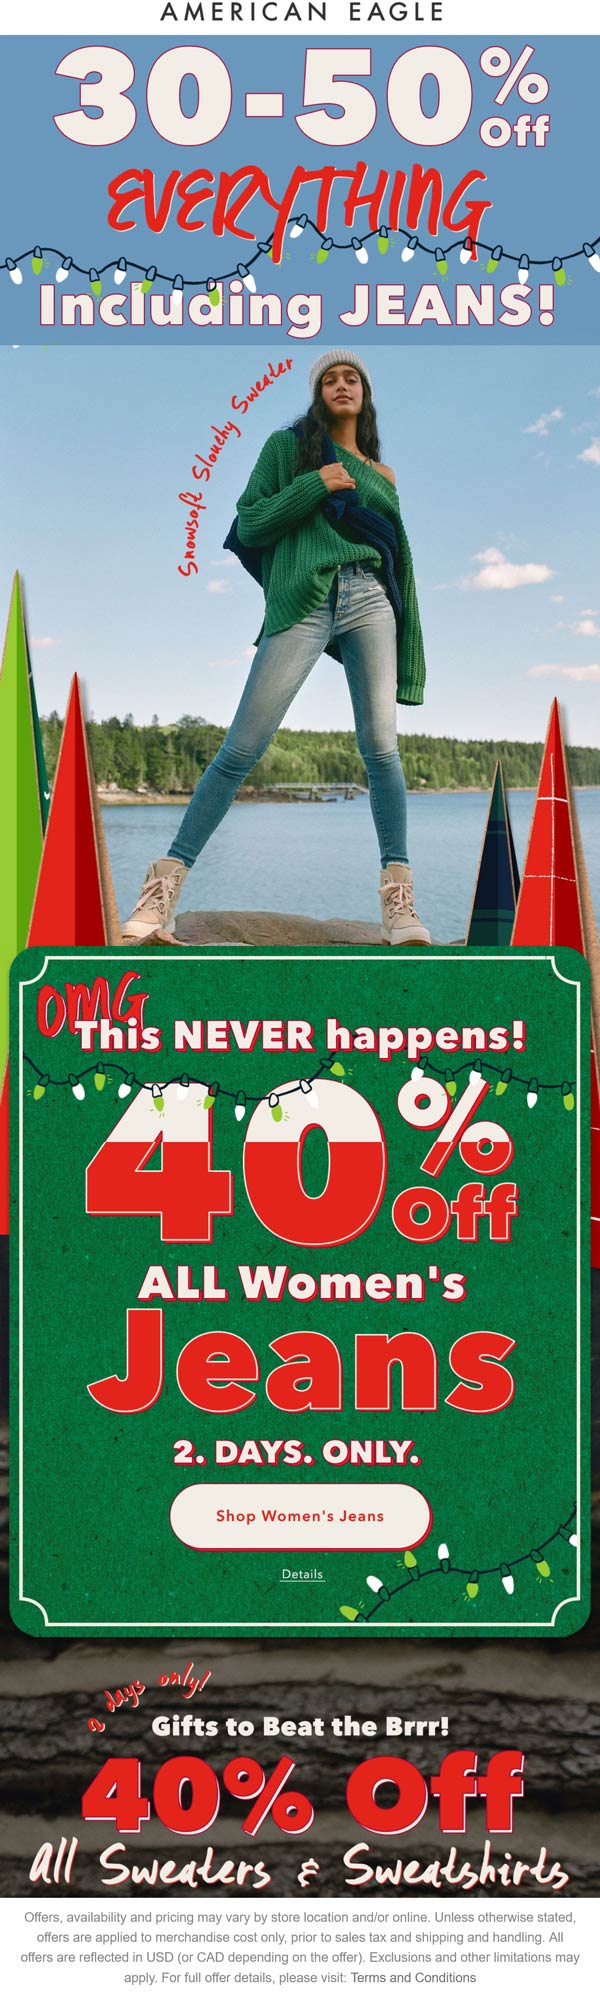 American Eagle stores Coupon  30-50% off everything at American Eagle #americaneagle 